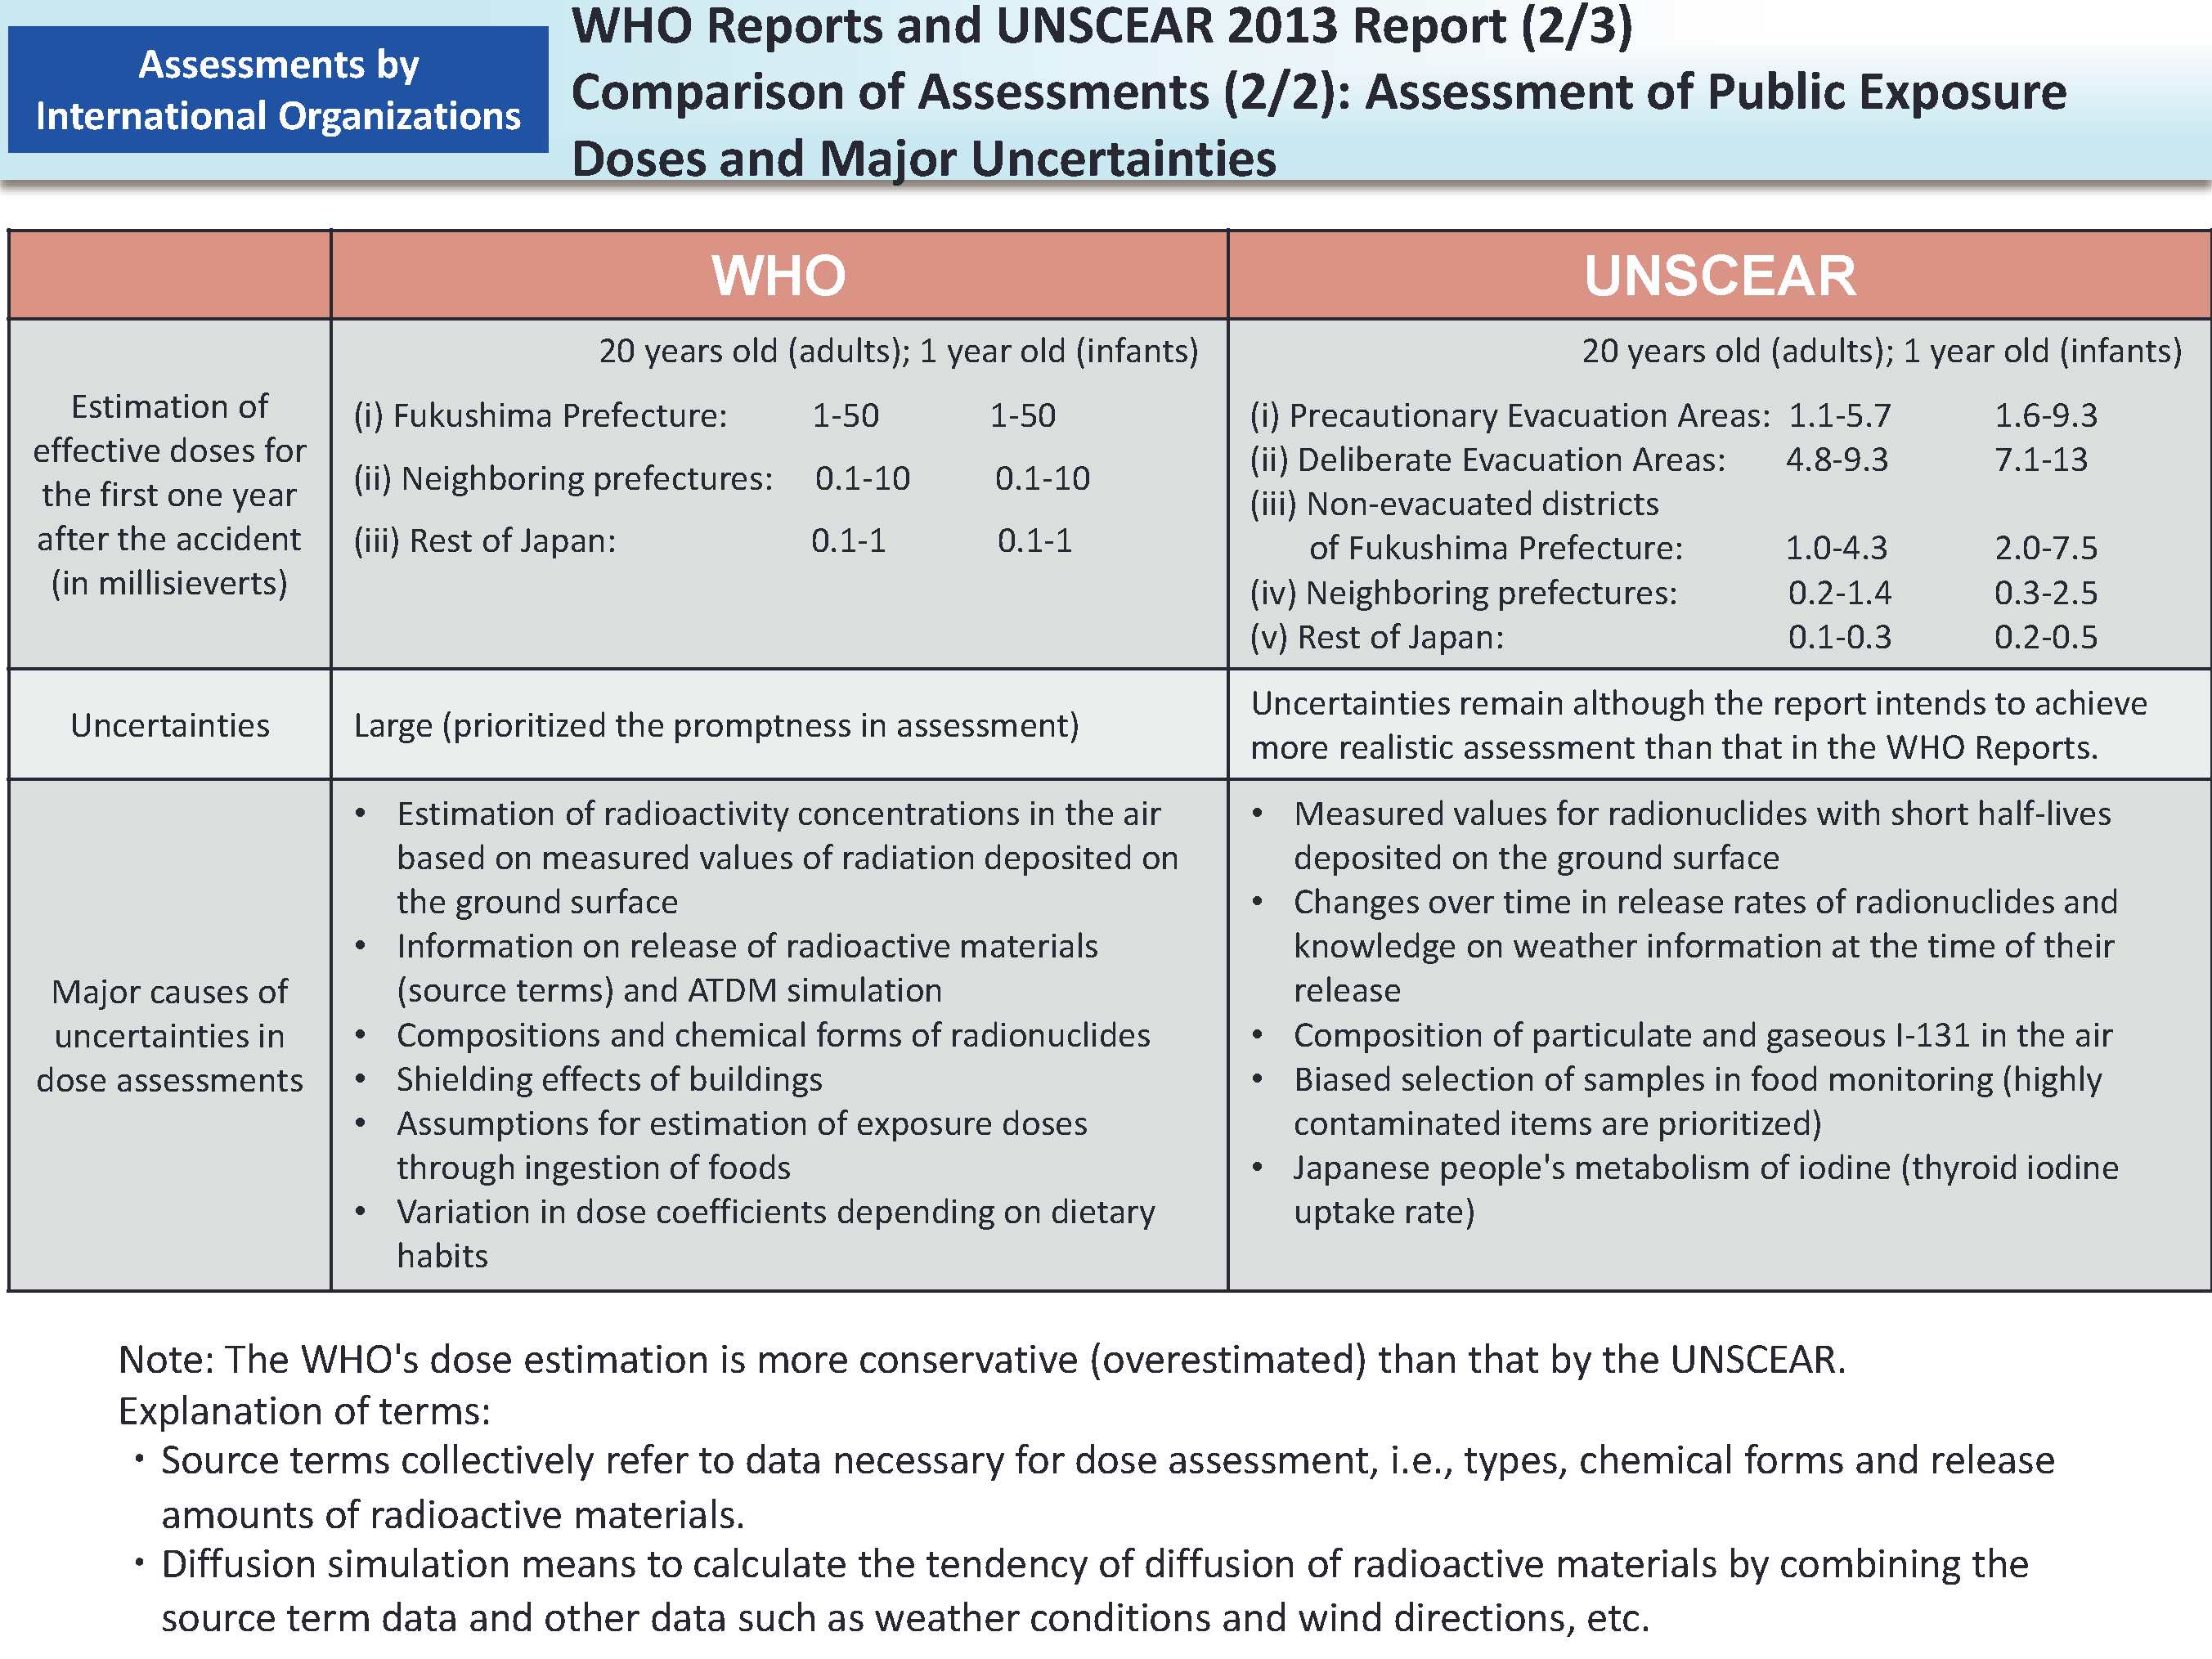 WHO Reports and UNSCEAR 2013 Report (2/3) Comparison of Assessments (2/2): Assessment of Public Exposure Doses and Major Uncertainties_Figure